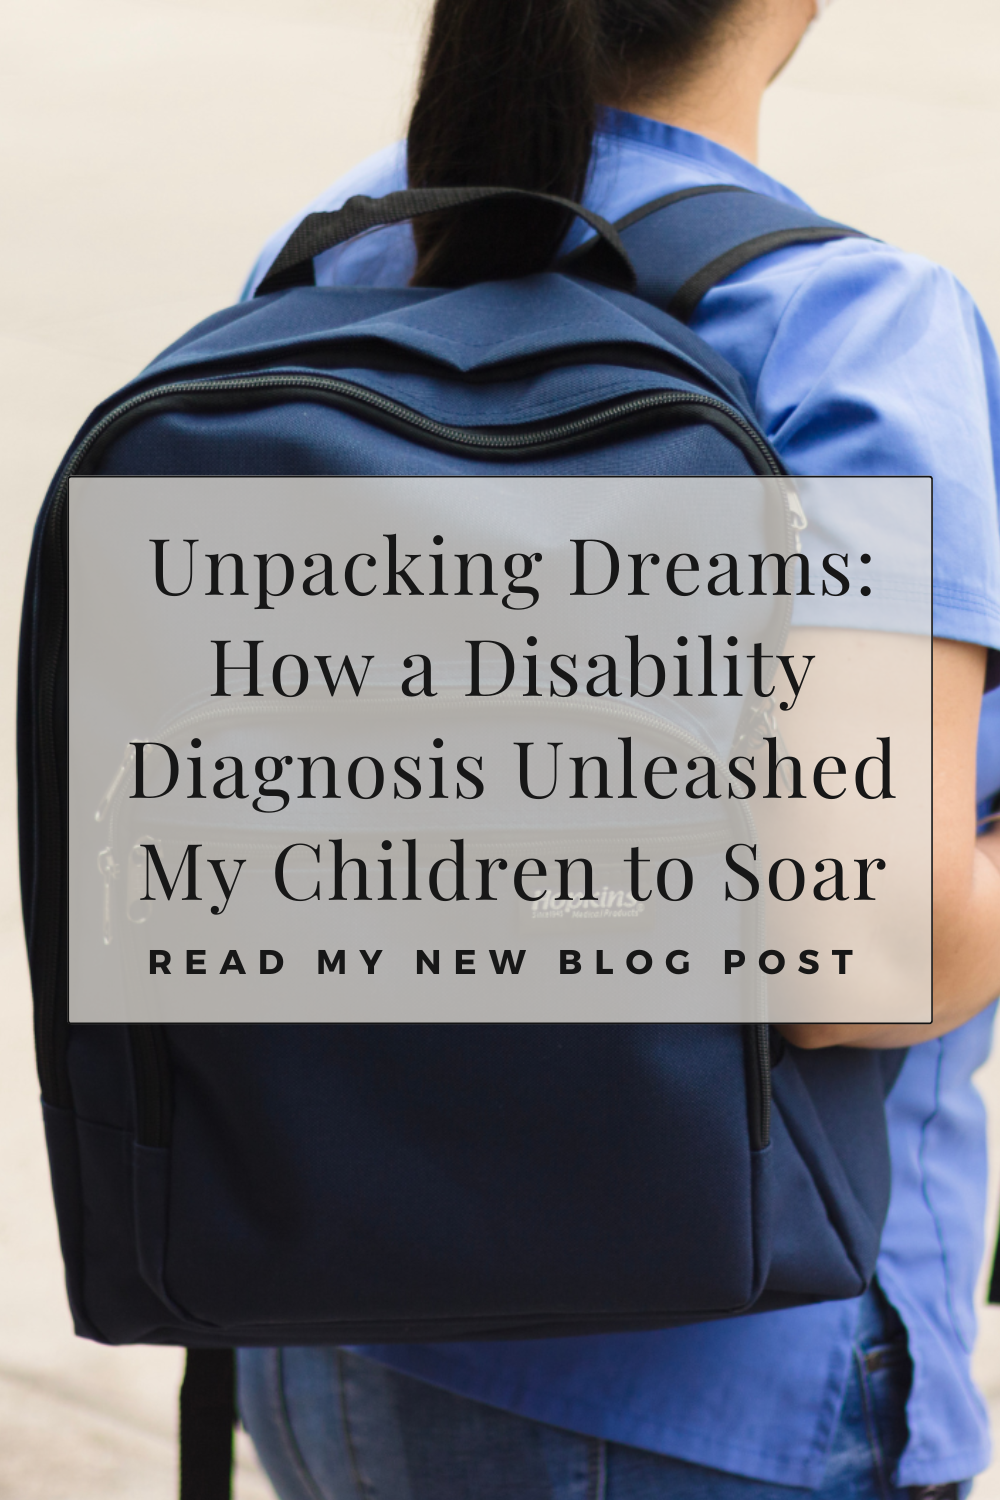 young person carrying a blue backpack. text reads Unpacking Dreams: How a Disability Diagnosis Unleashed my Children to Soar